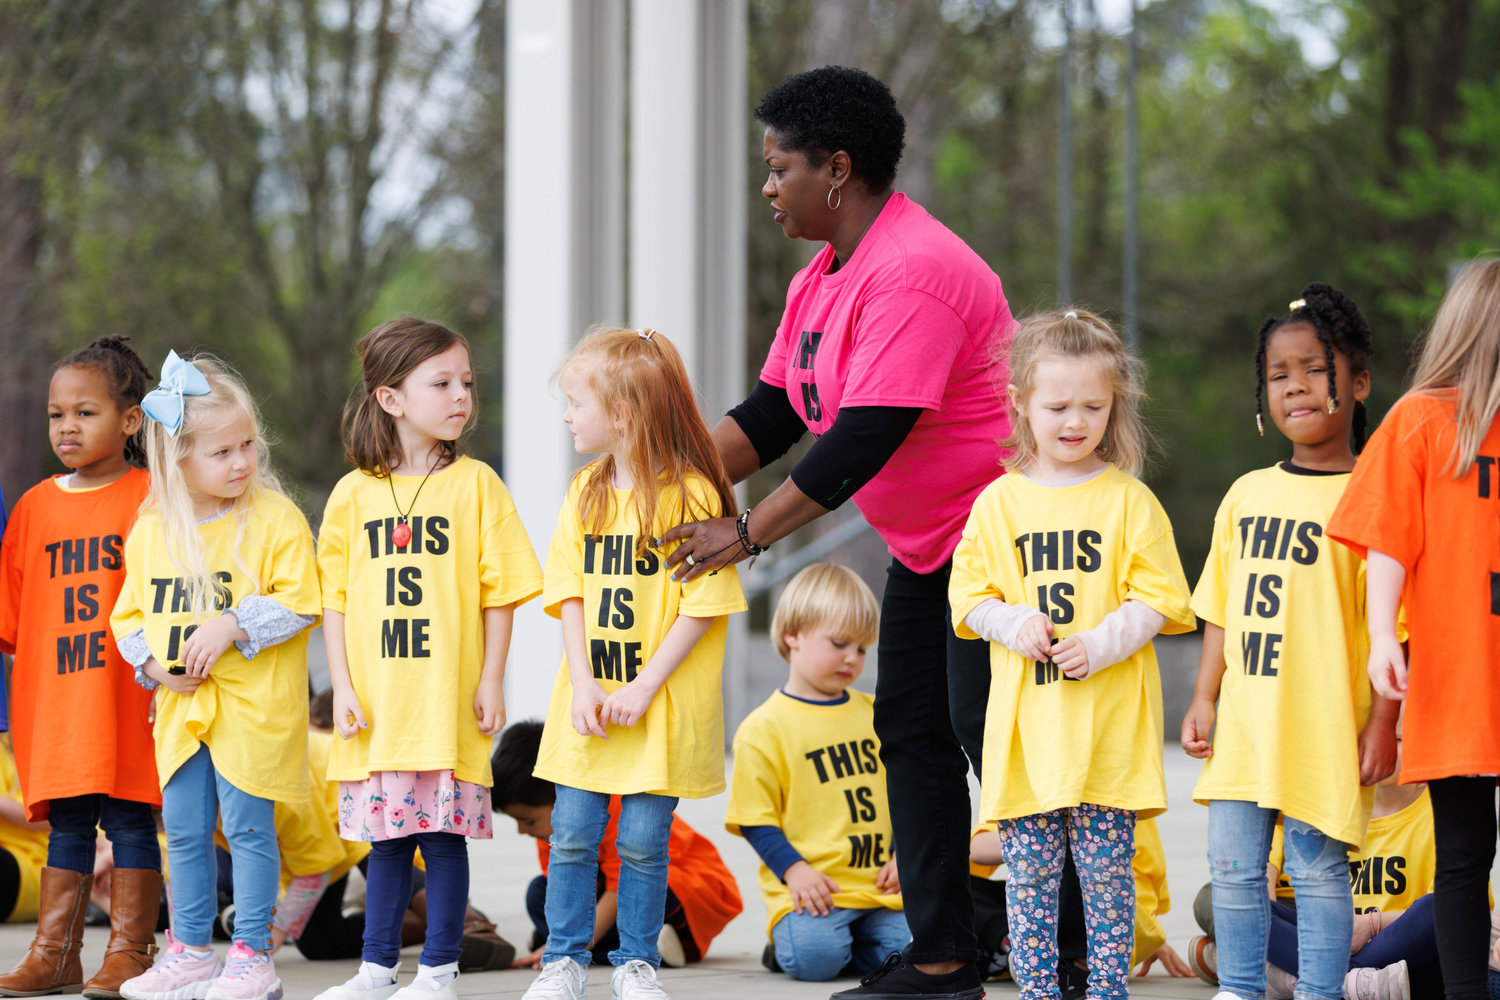 Verenda Luttrell, a preschool teacher with Snyder Learning Center, positions students for a performance at Festival Park in celebration of a pinwheel garden.